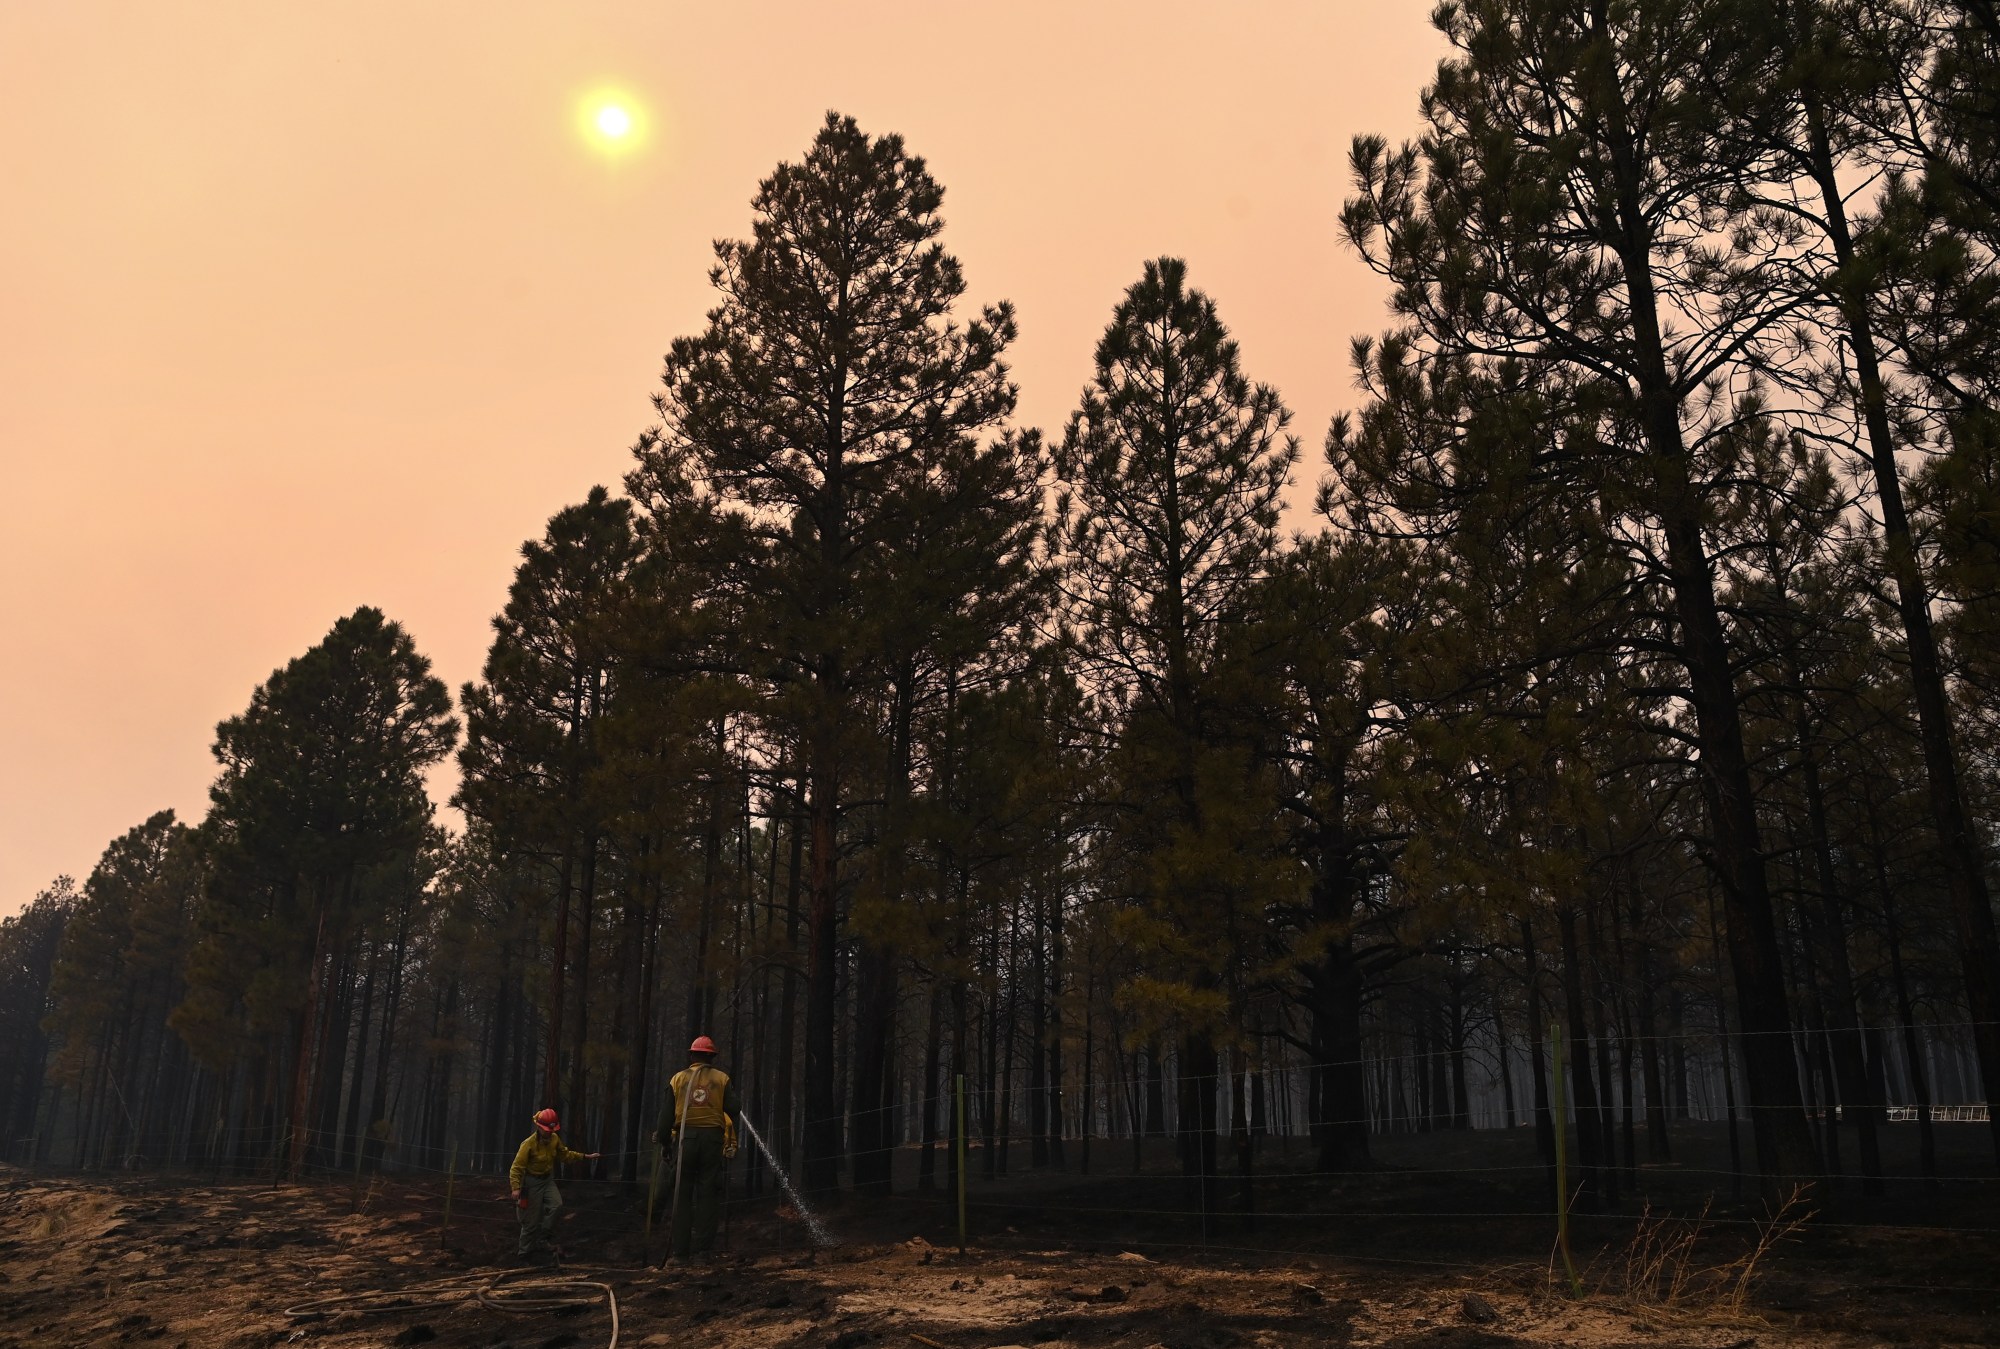 Photo shows two firefighters with a hose in front of a smoky forest.